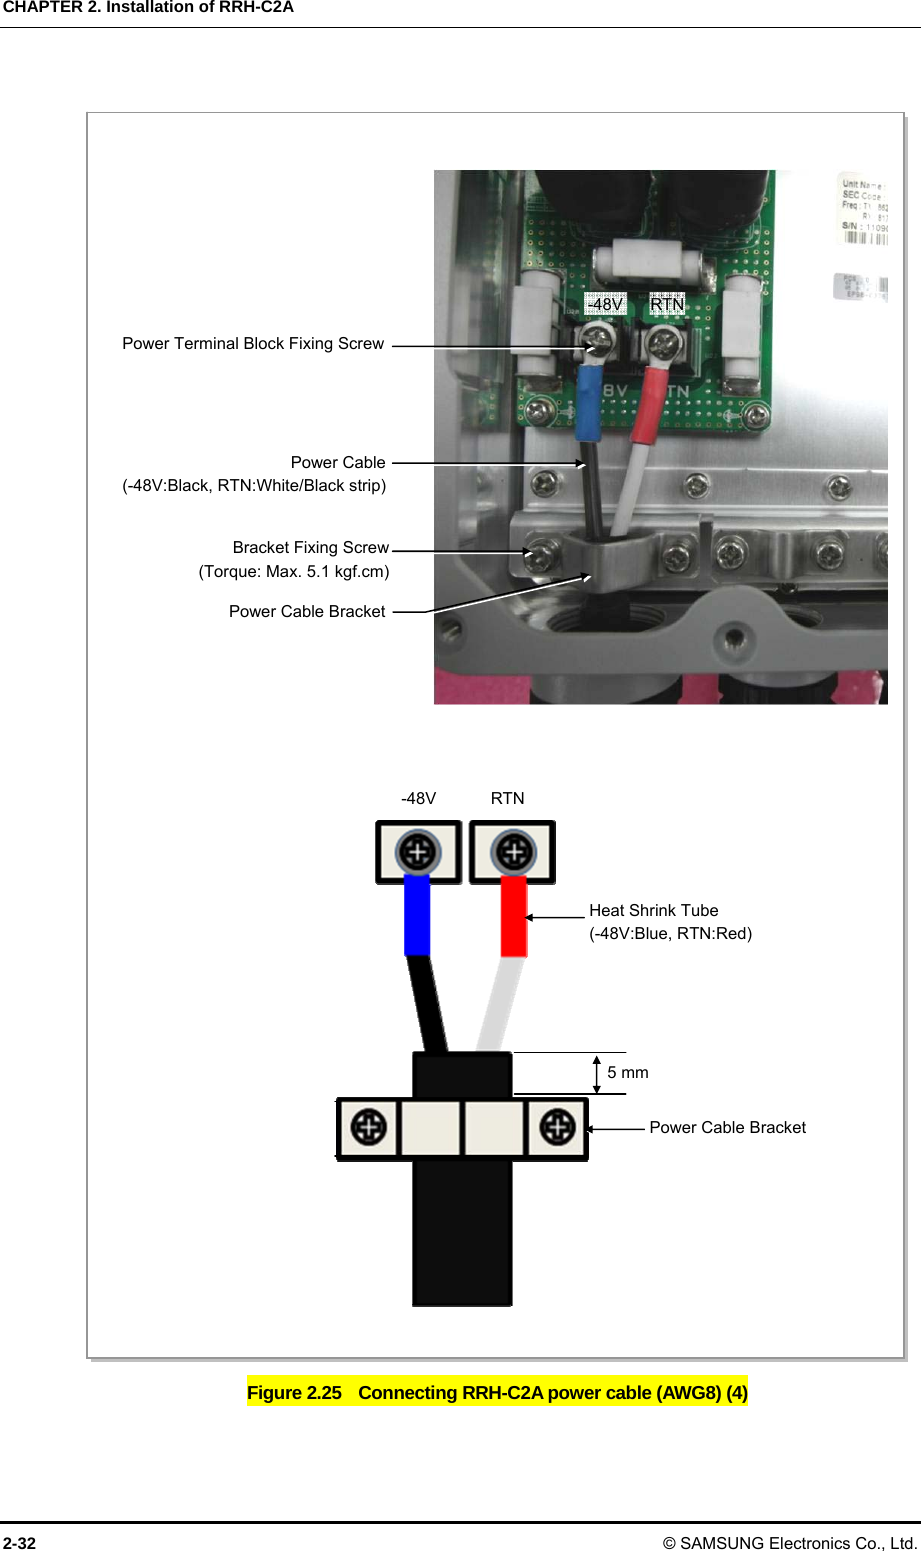 CHAPTER 2. Installation of RRH-C2A 2-32 © SAMSUNG Electronics Co., Ltd.  Figure 2.25    Connecting RRH-C2A power cable (AWG8) (4) Power Terminal Block Fixing ScrewRTN-48VBracket Fixing Screw(Torque: Max. 5.1 kgf.cm)Power Cable(-48V:Black, RTN:White/Black strip)Power Cable BracketRTN-48V5 mm Heat Shrink Tube (-48V:Blue, RTN:Red) Power Cable Bracket 